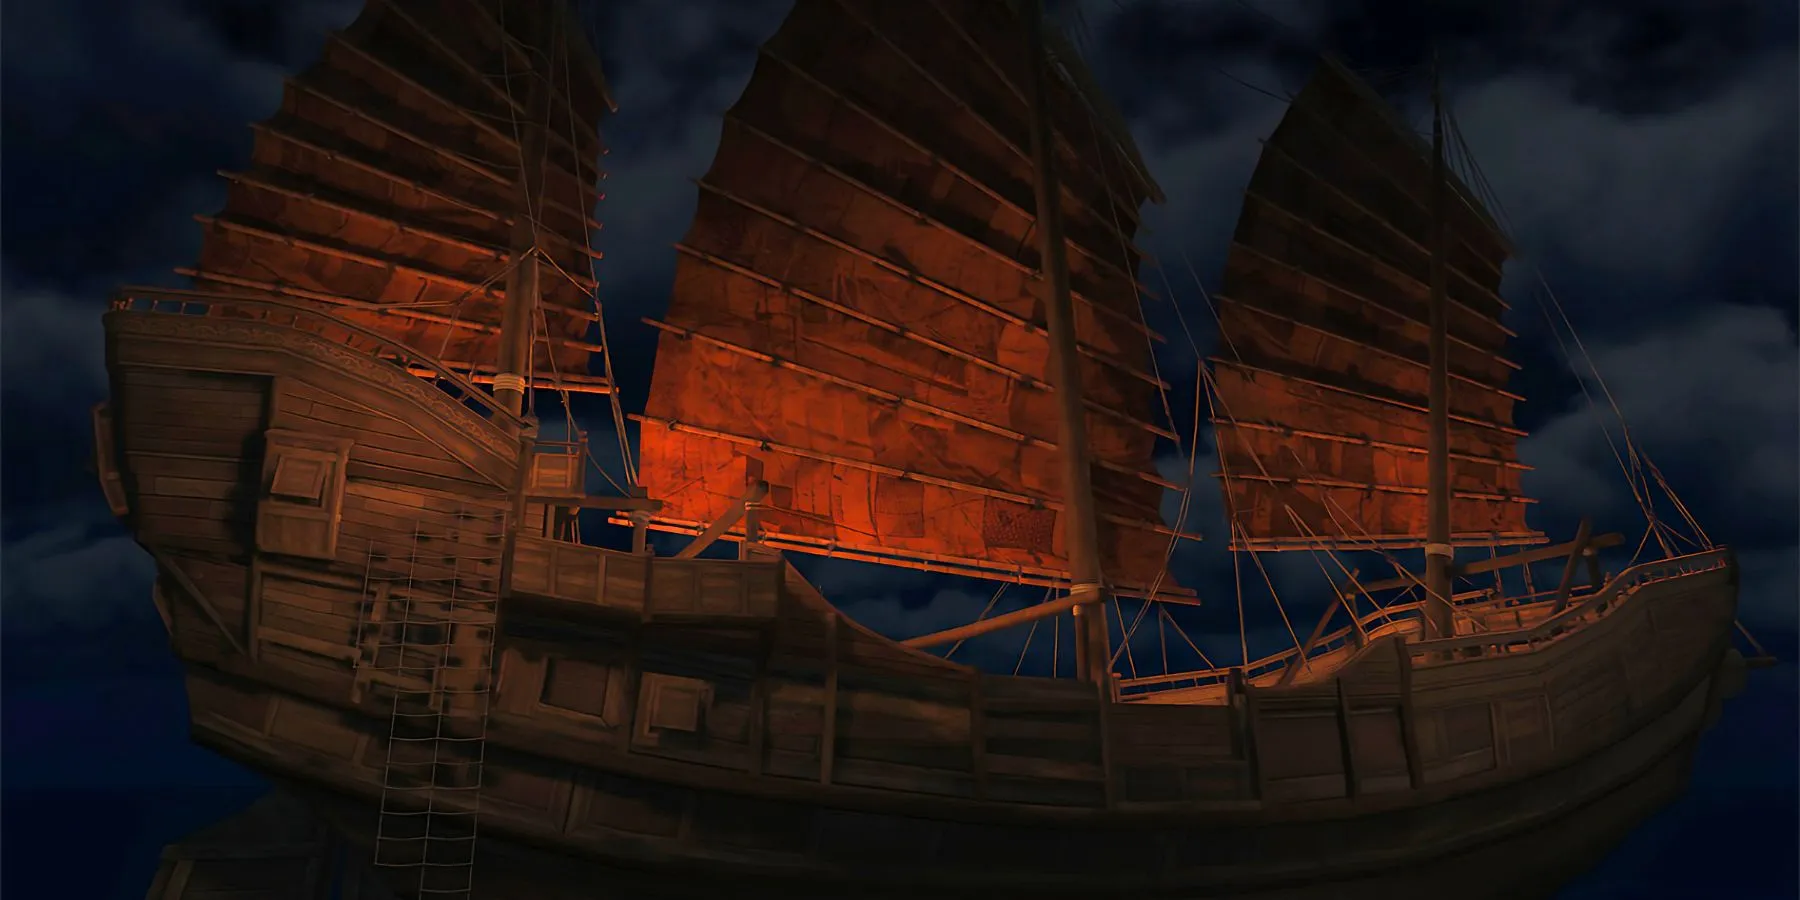 The Pirate Queen ship